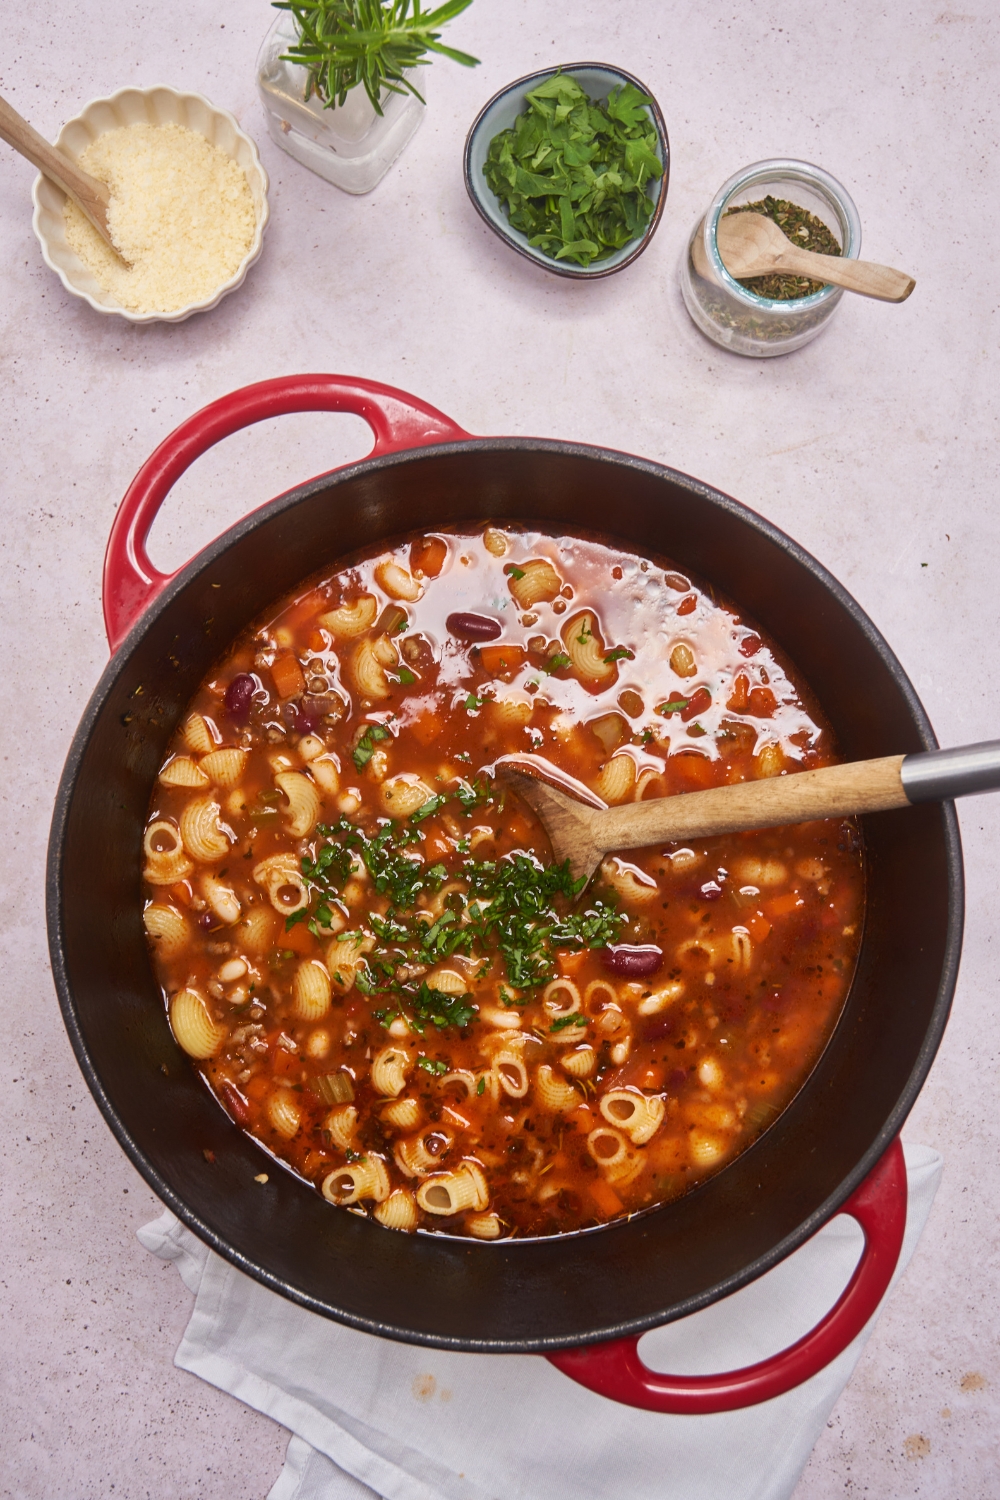 Dutch oven filled with pasta noodles, vegetables, beans, and fresh green herbs simmering in a tomato broth.